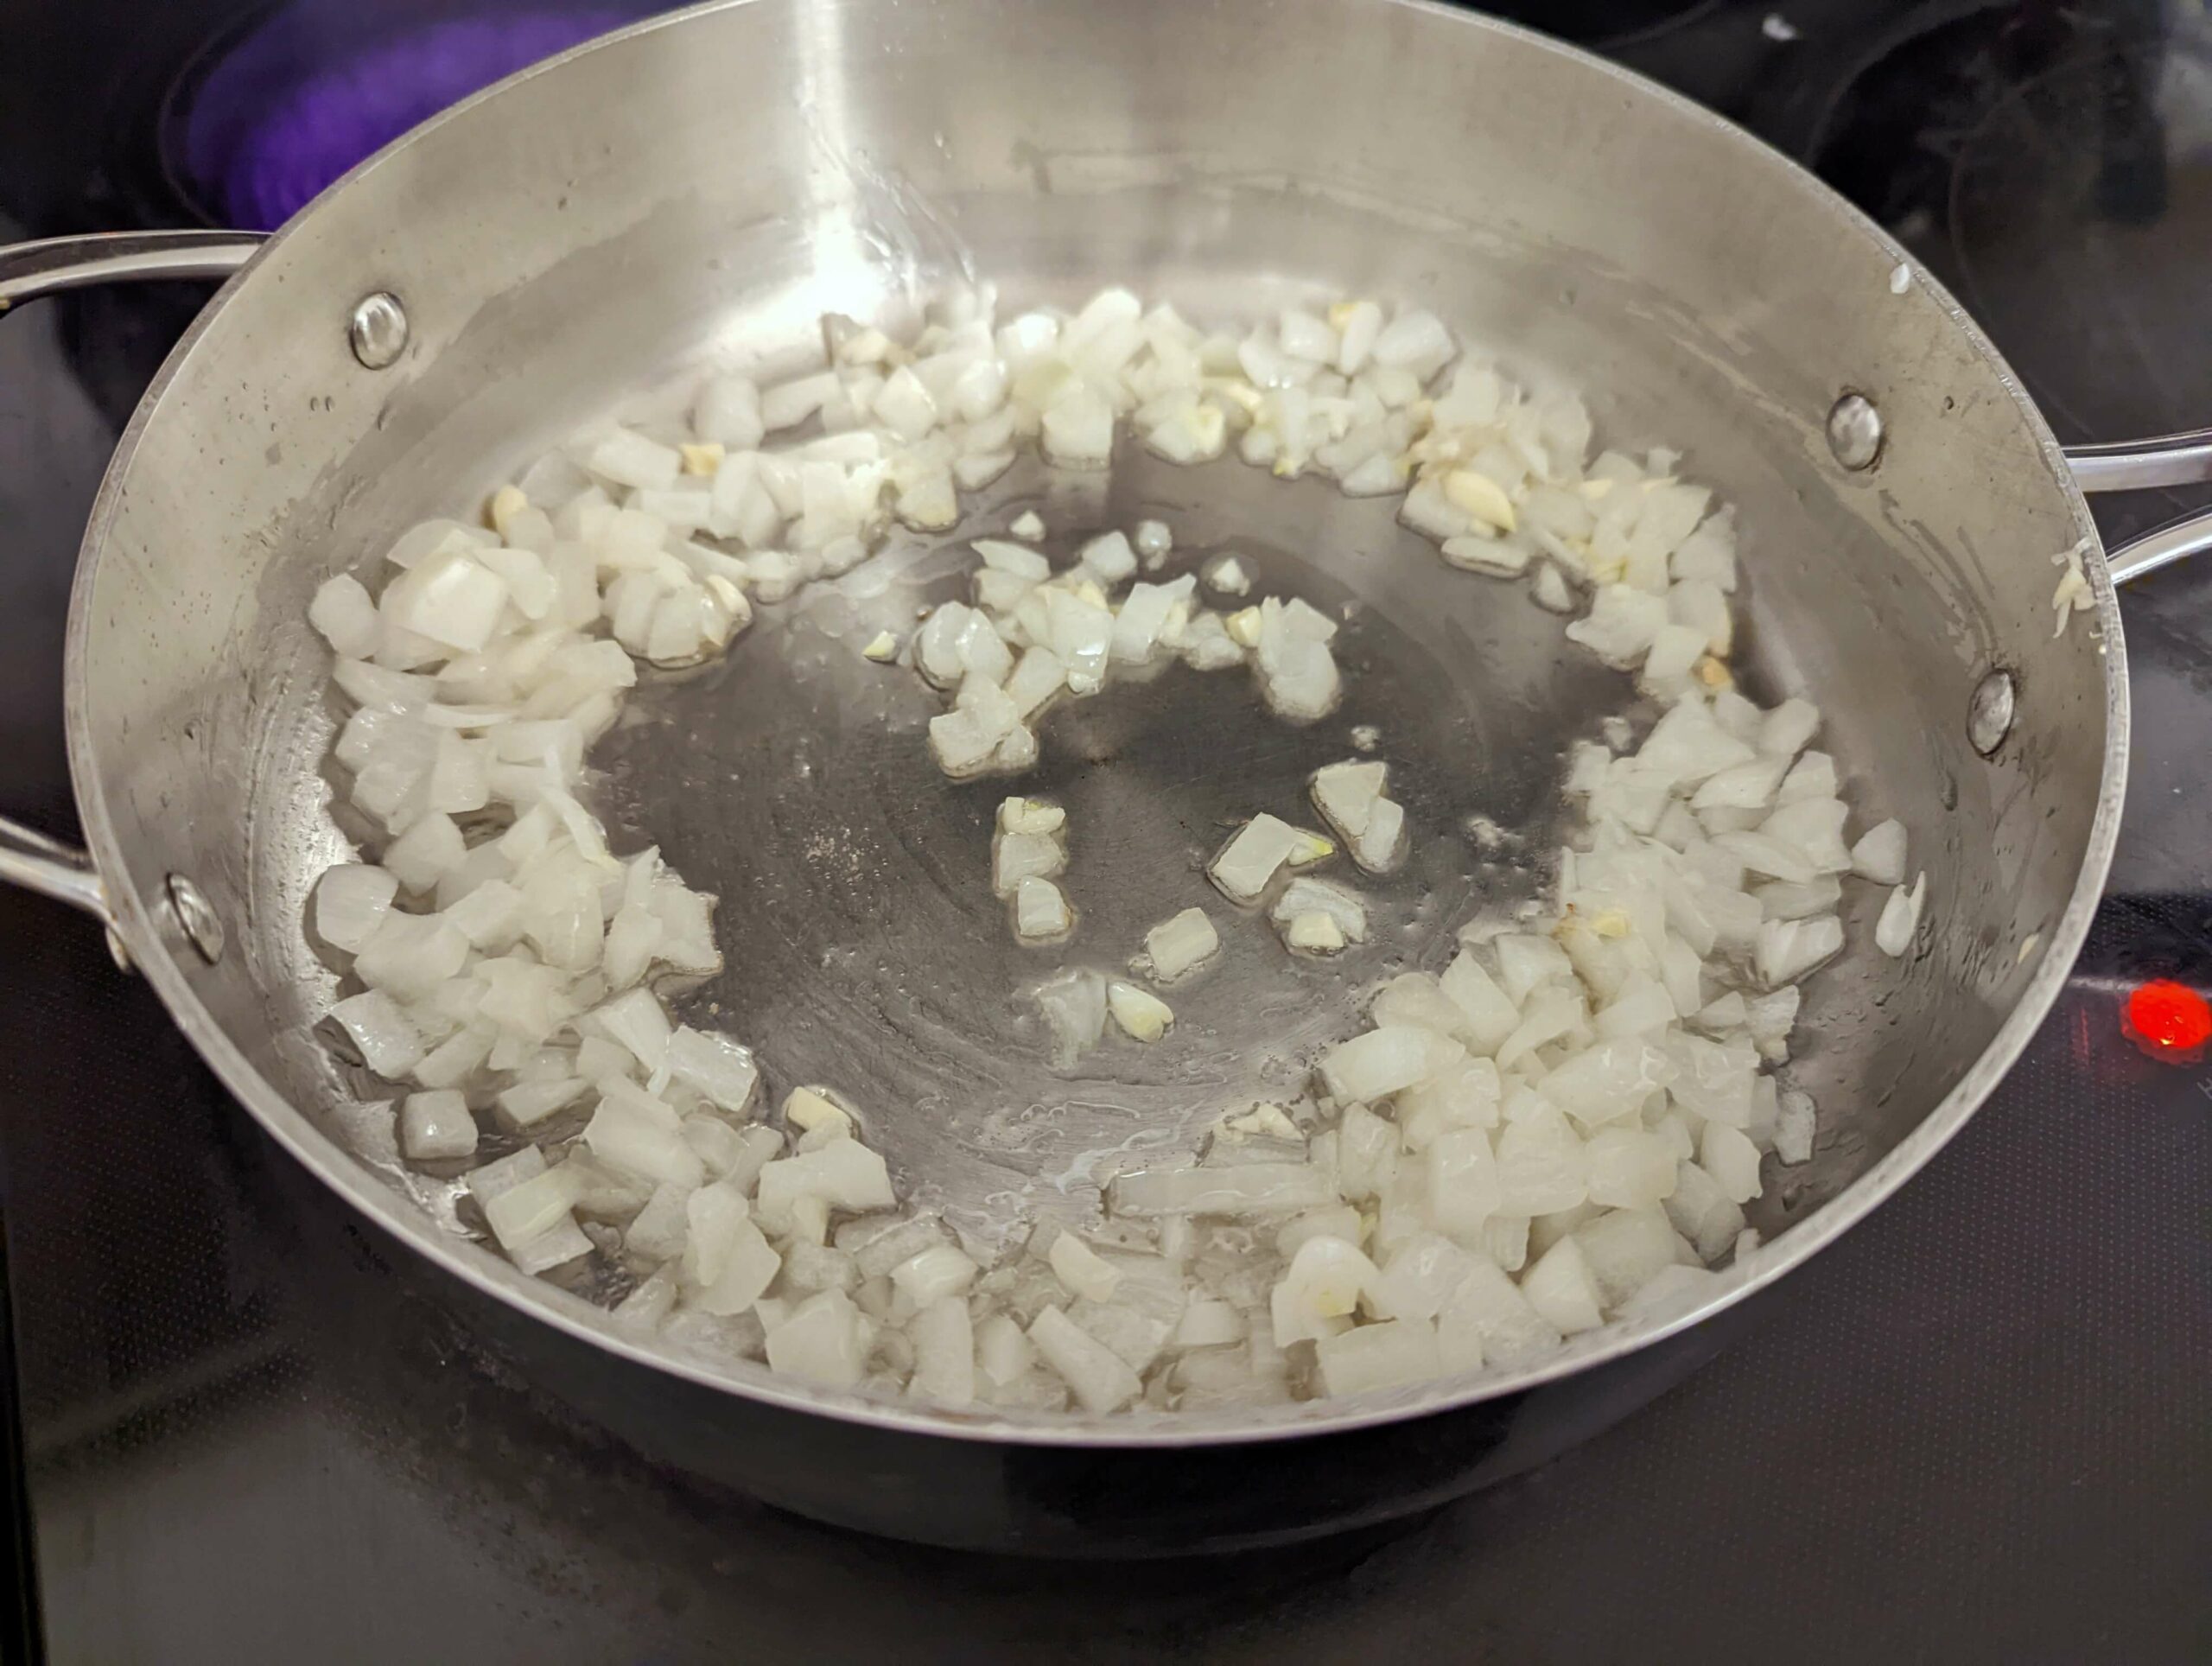 Onions cooking in a saute pan.